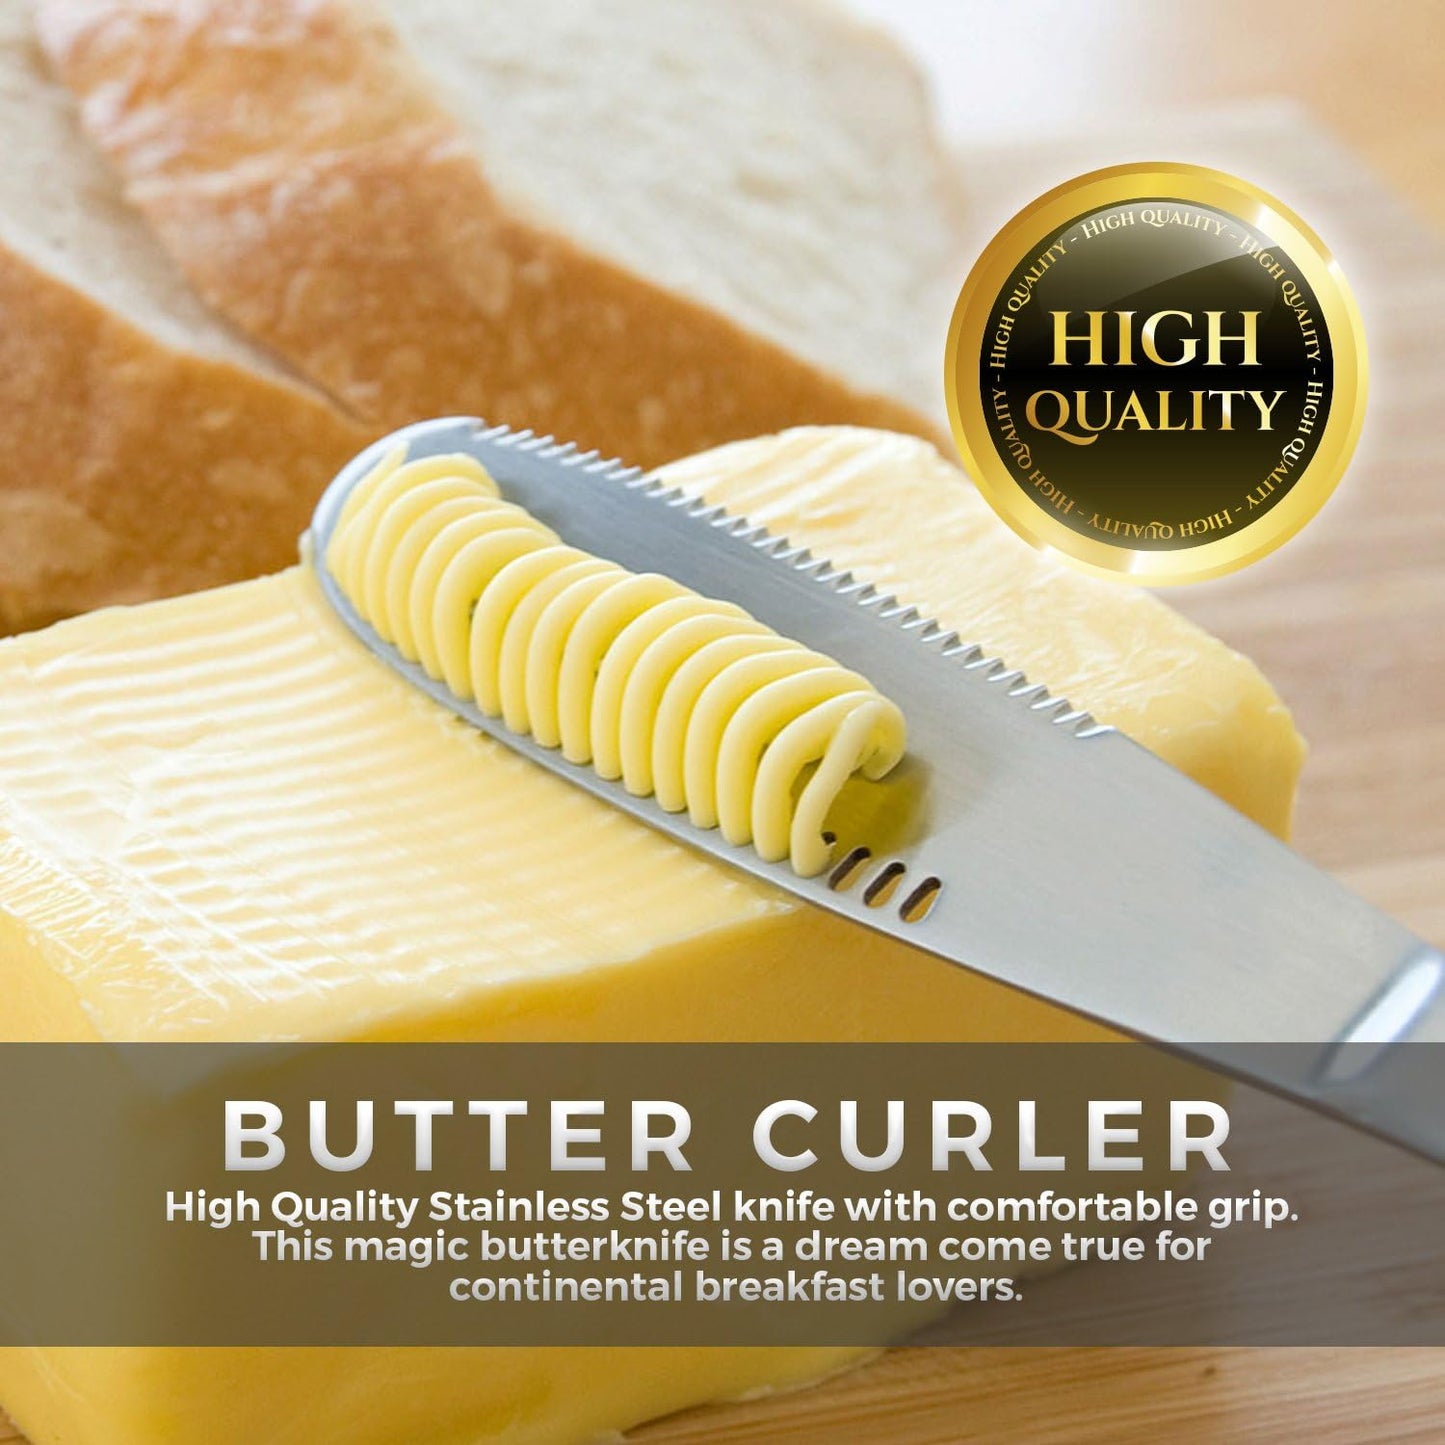 A butter curler knife is curling the top layer of some butter.